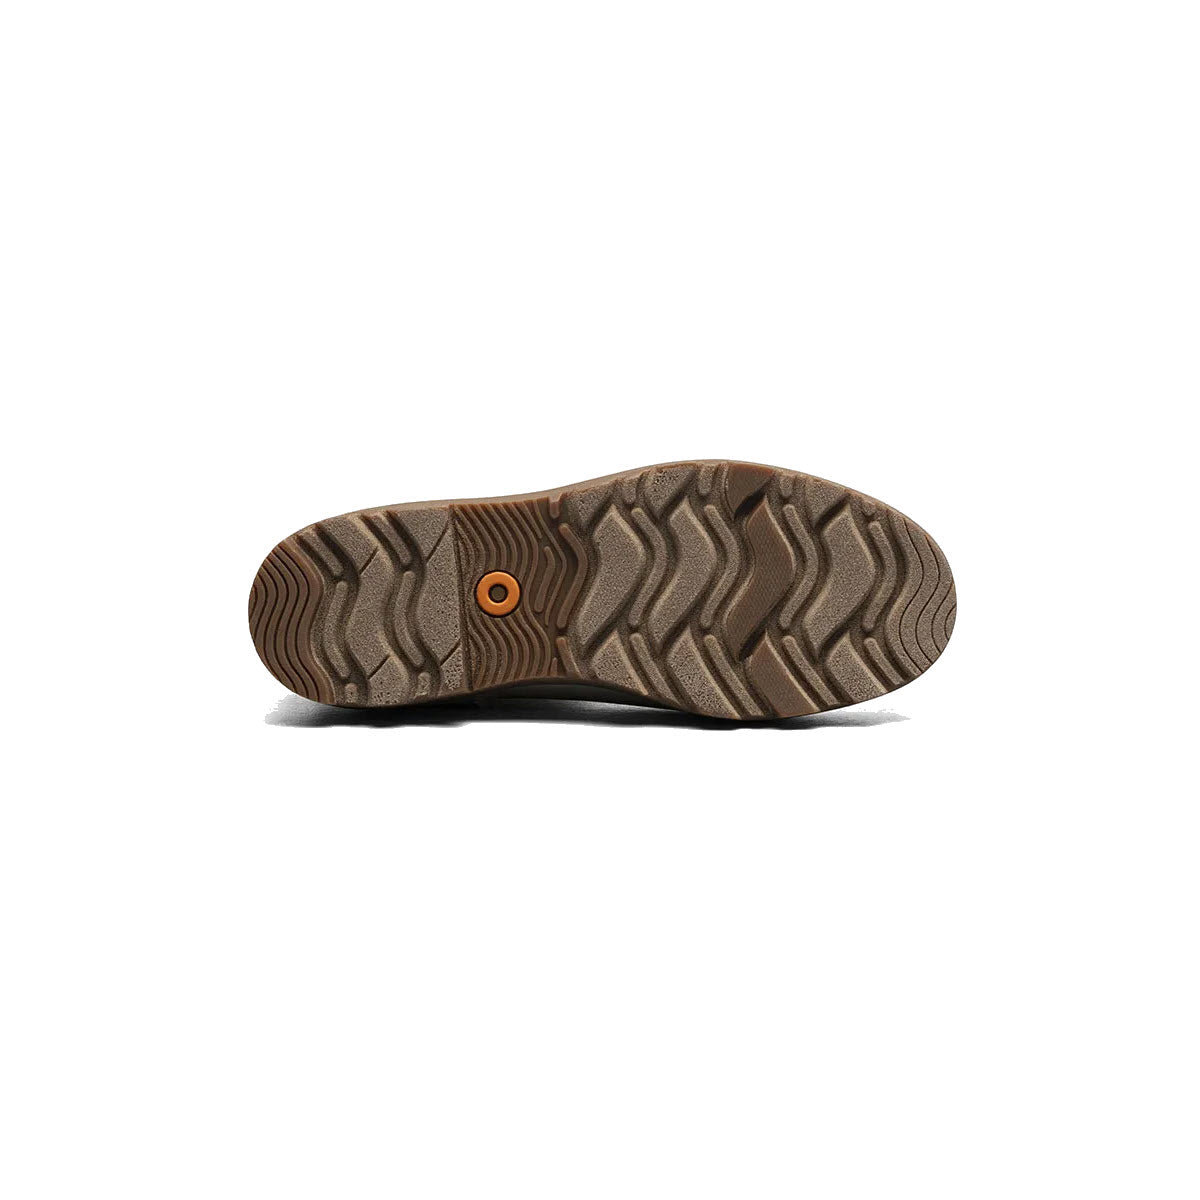 A photo of the bottom of a shoe showing a brown wavy tread pattern with an orange circular detail and Bogs Rebound Cushioning.